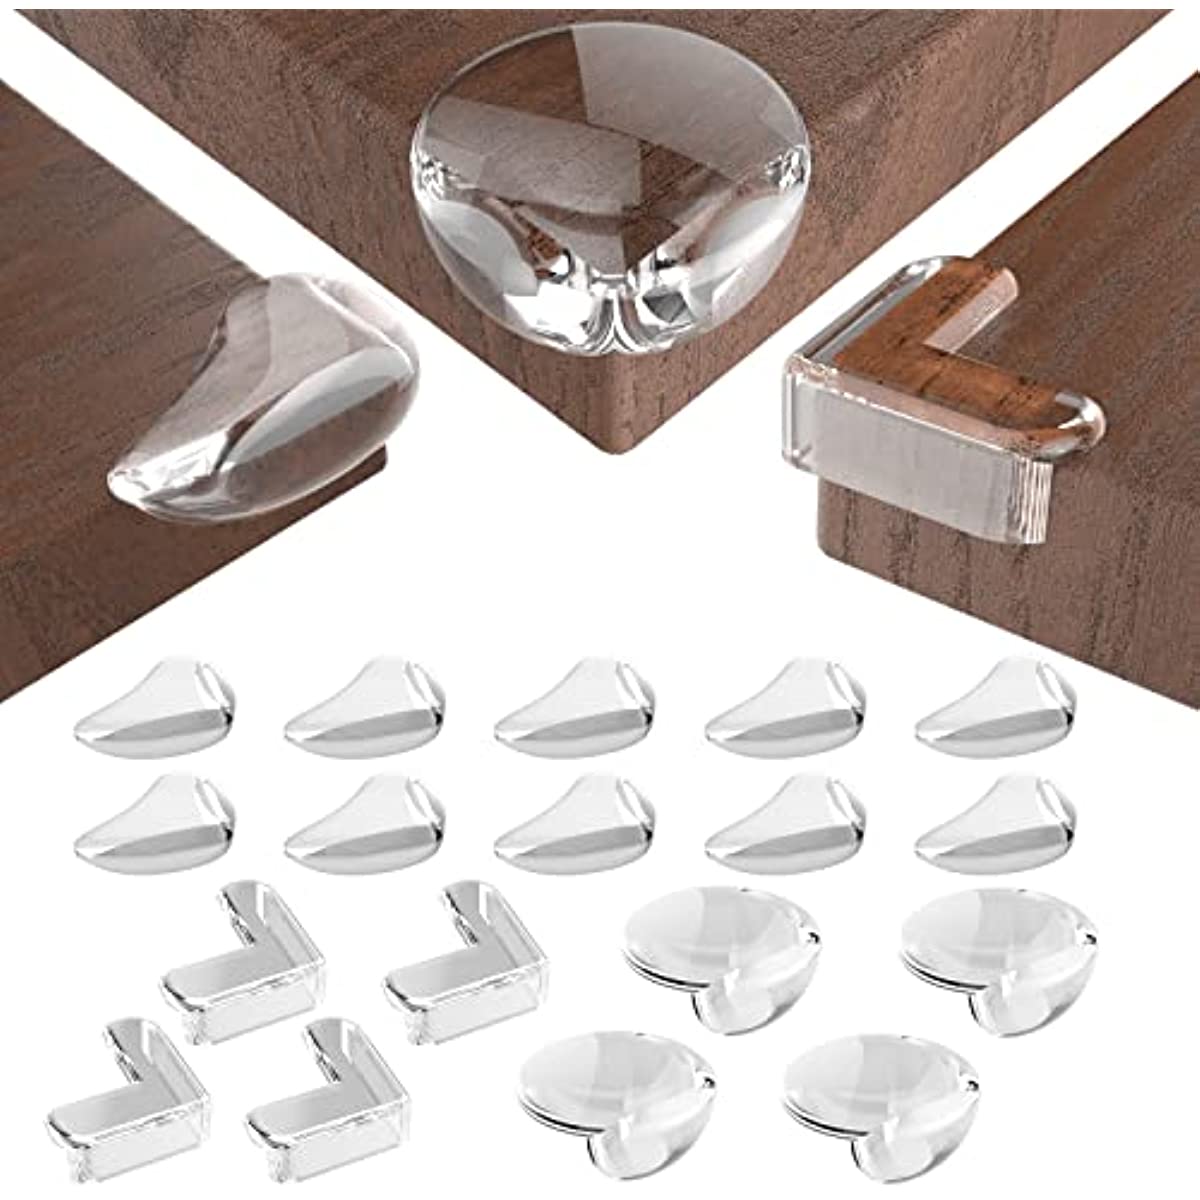 8 Pack Corner Protector for Baby, Clear Furniture Corner Guard & Edge  Safety Bumpers for Table Edges & Sharp Corners - Baby Proofing (L Shape)